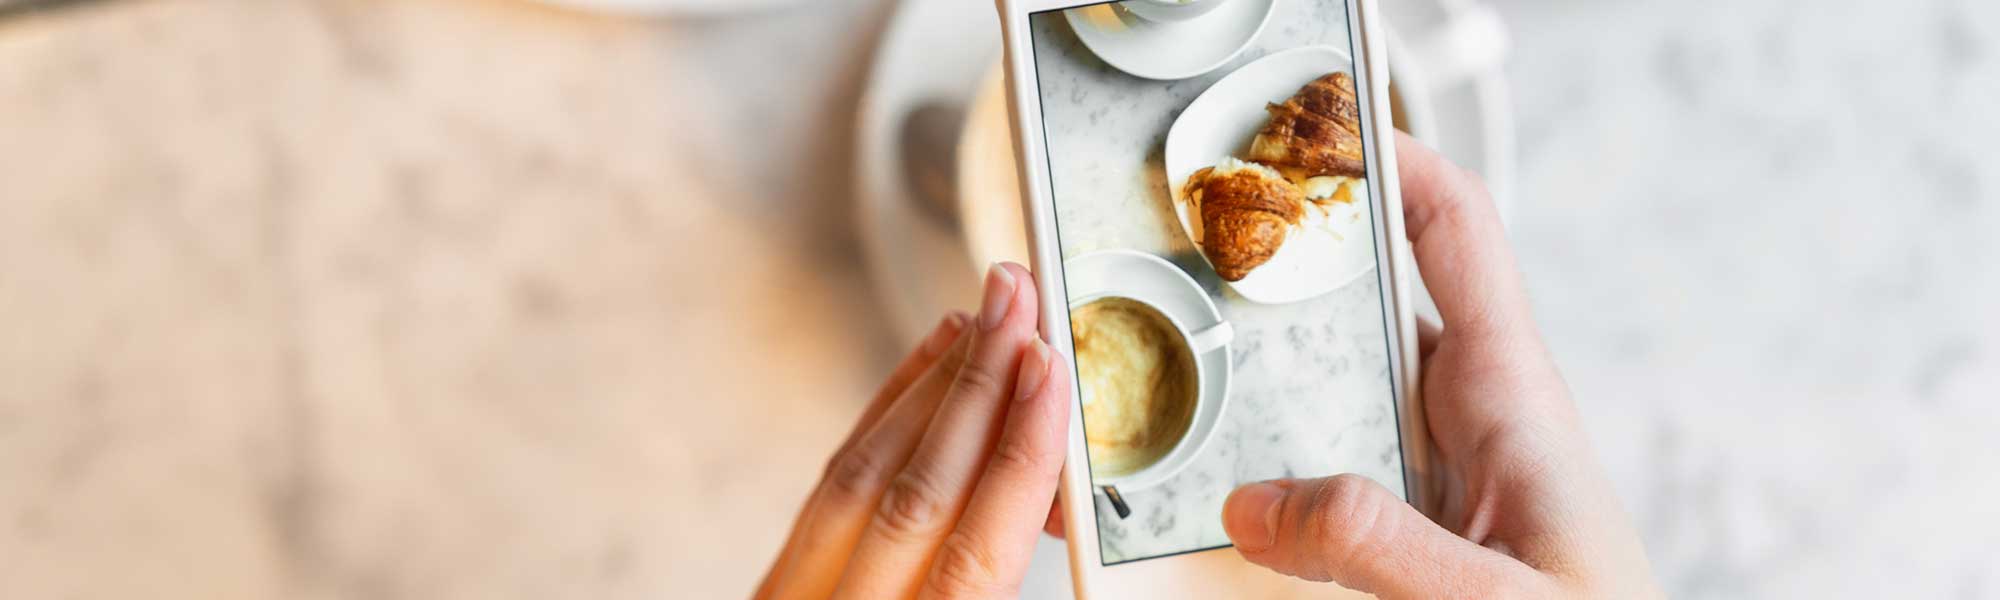 Hands taking photo of croissant and cup of coffee with a smartphone.